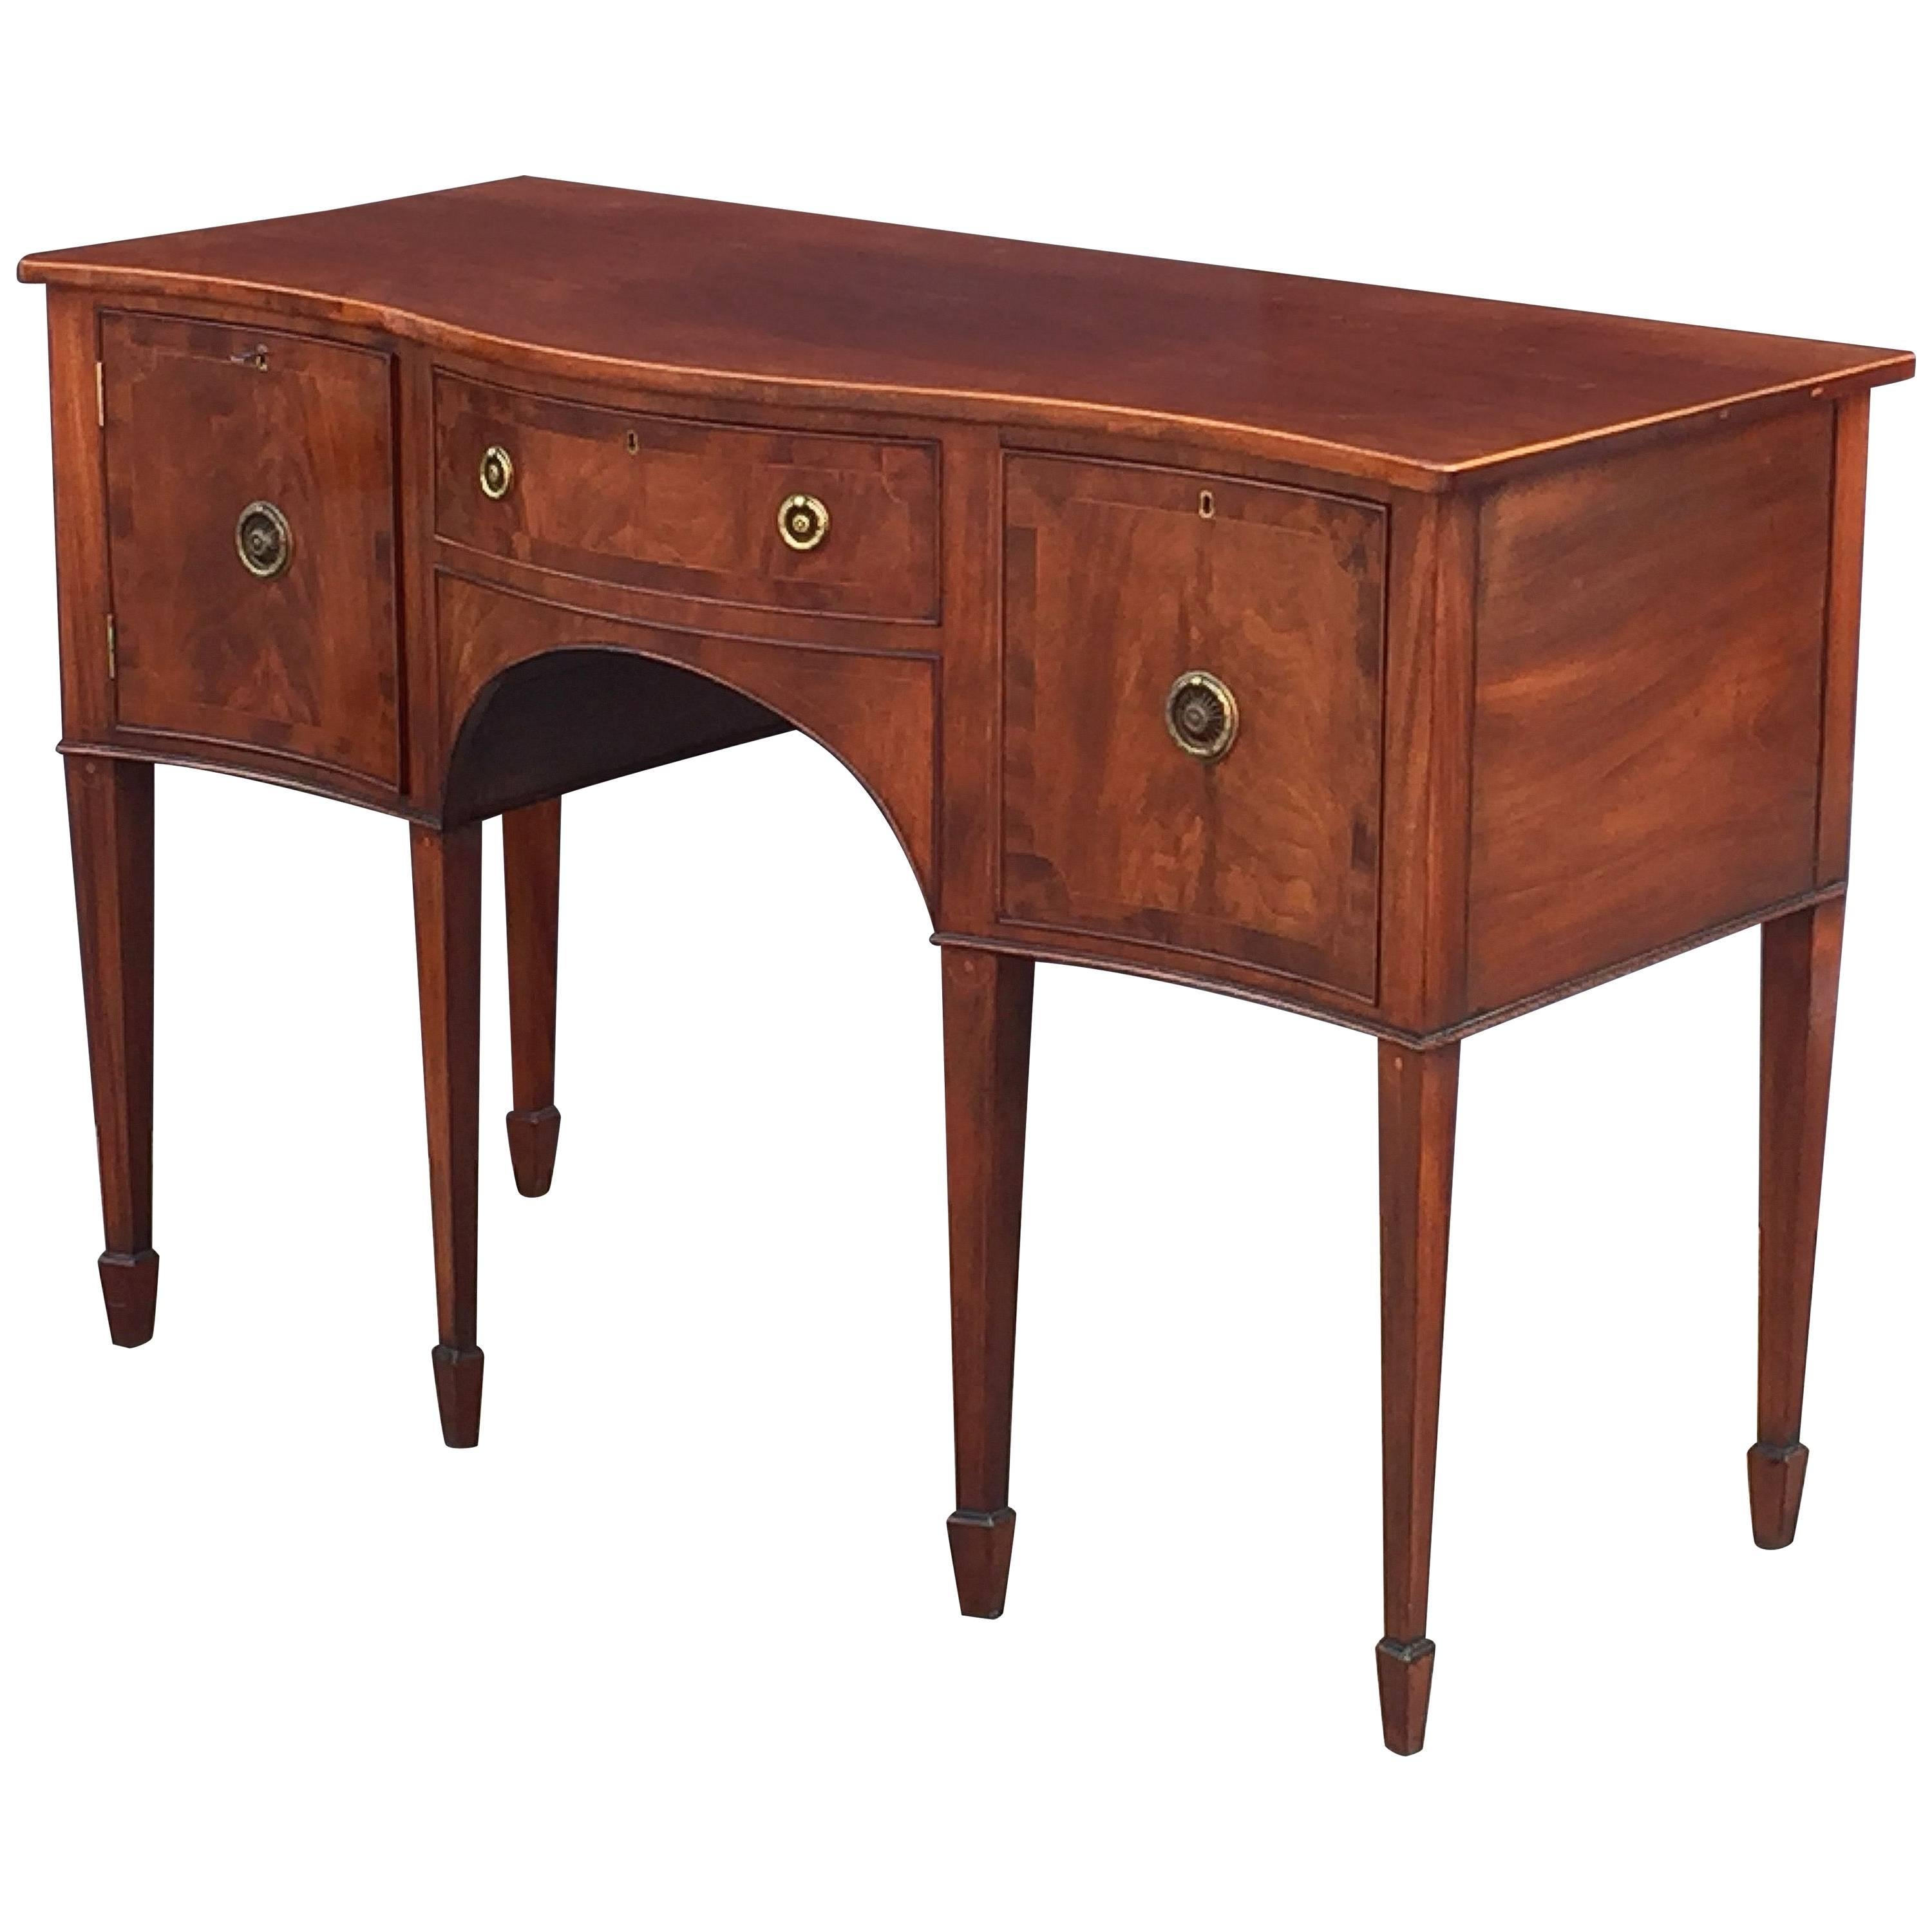 English Sideboard Console of Inlaid Flame Mahogany in the Sheraton Style